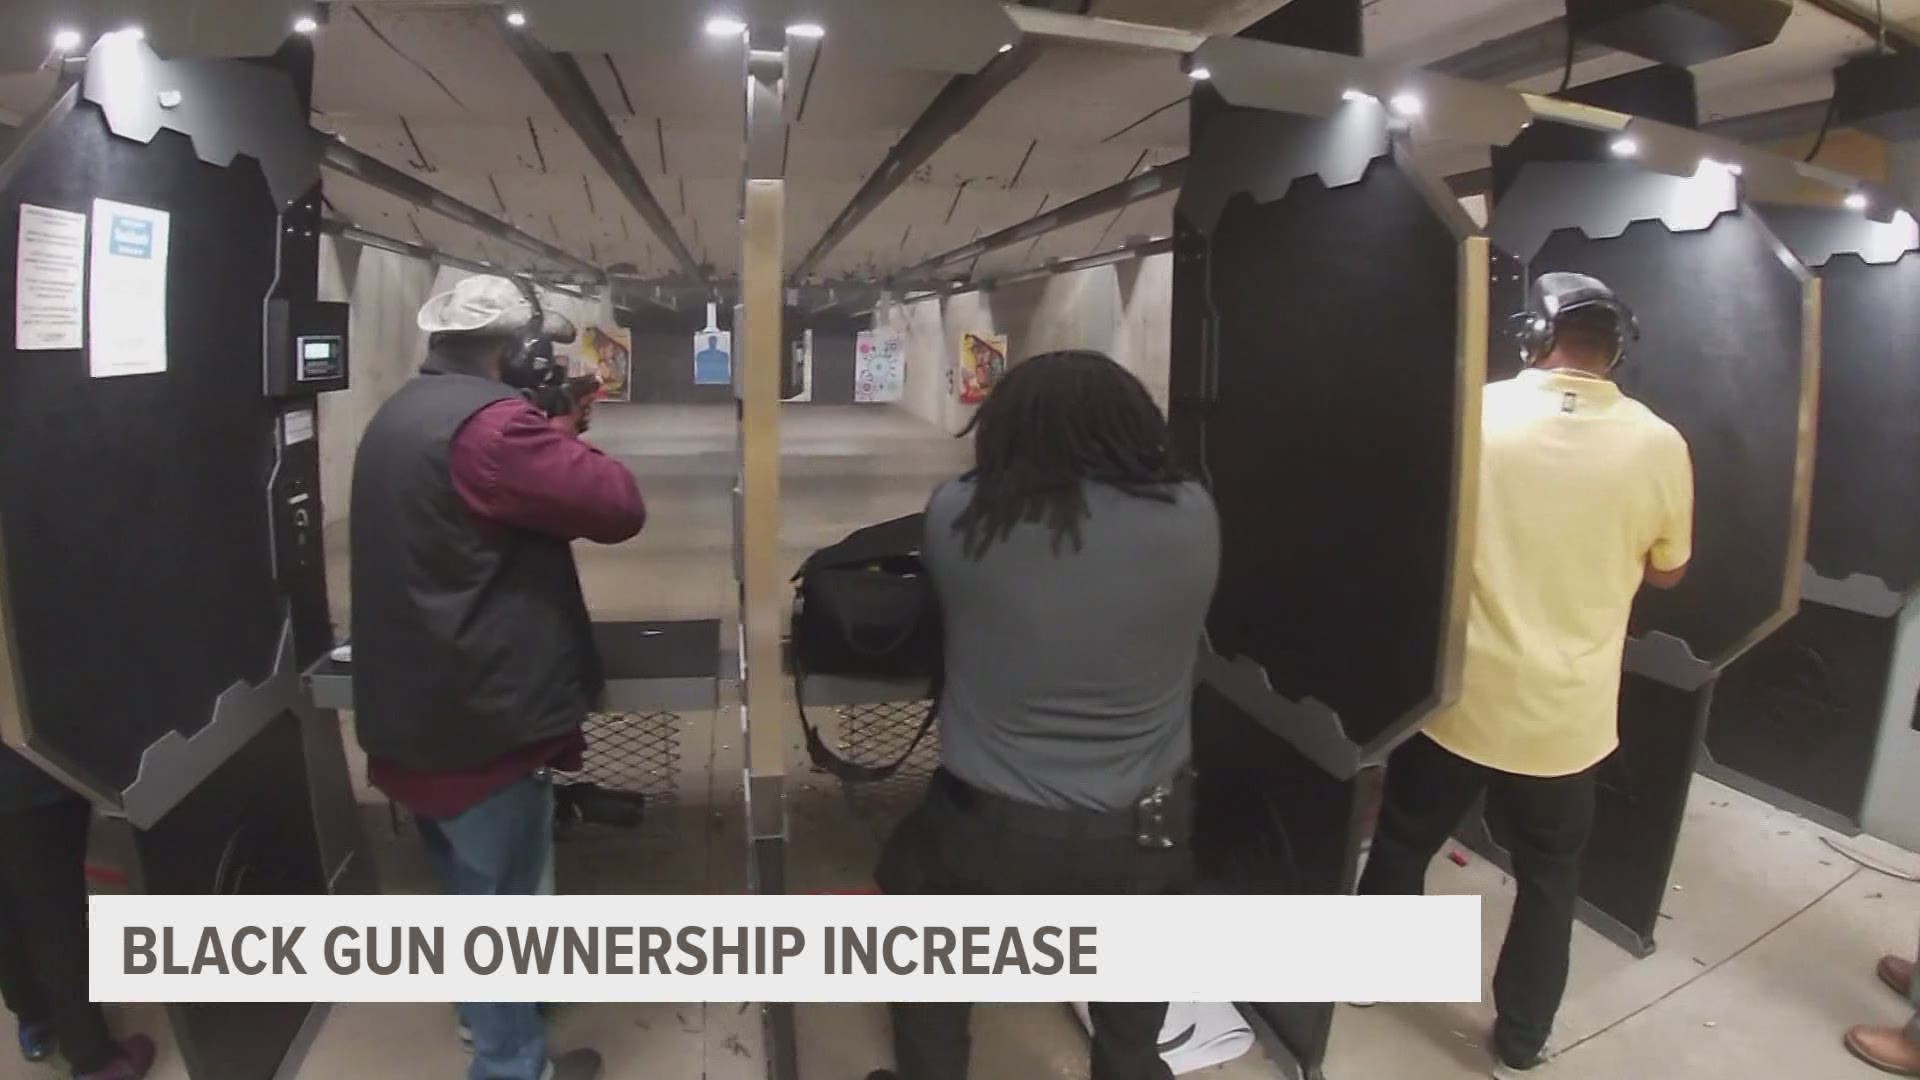 According to NSSF there was a 58.2 percent increase in gun purchases by Black men and women during the first half of 2020.